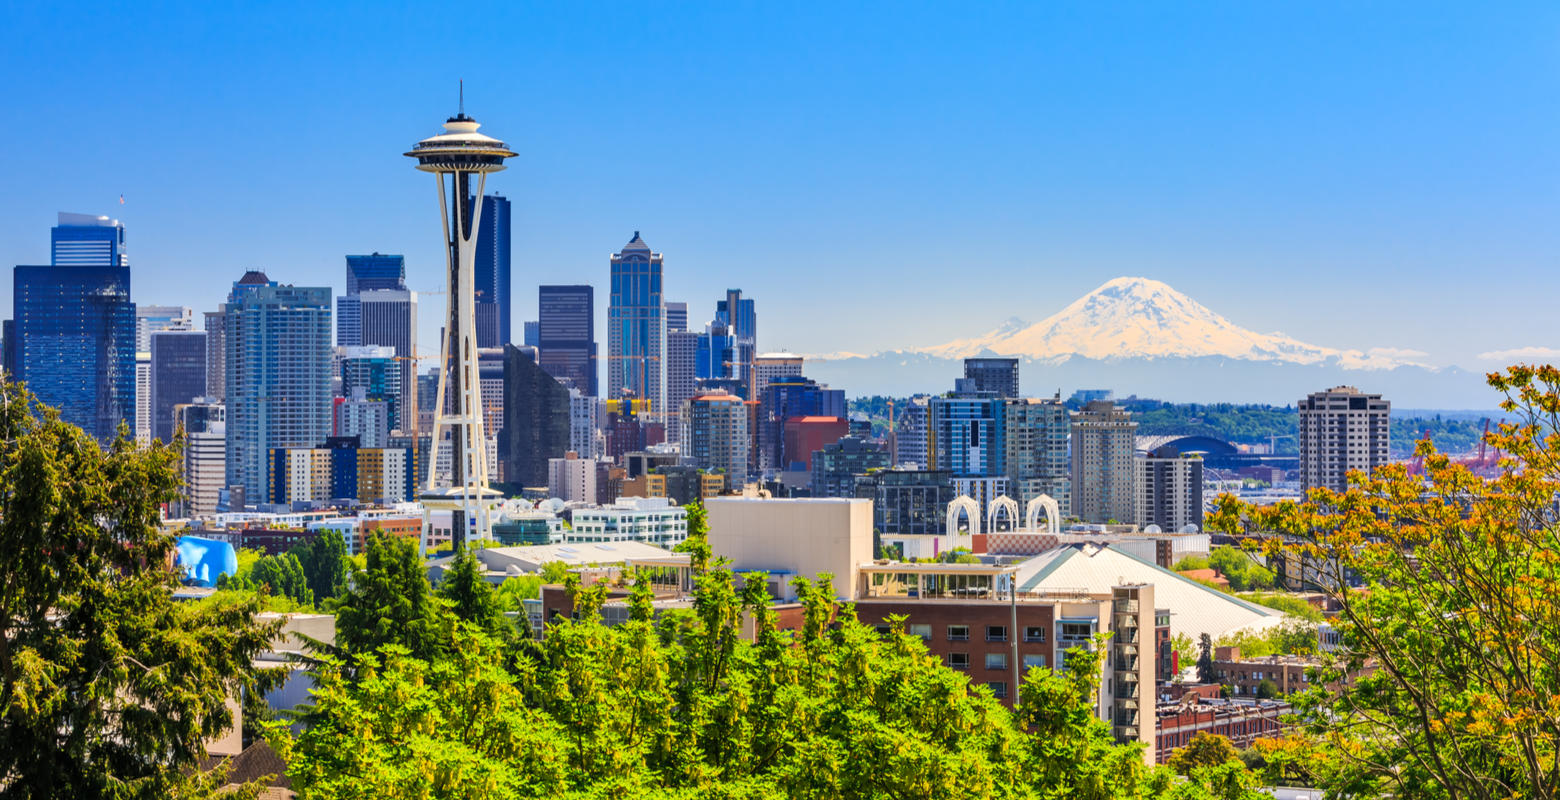 Featured image for a piece on where to stay in Seattle featuring a skyline of Seattle with the space needle and mount rainier in the background